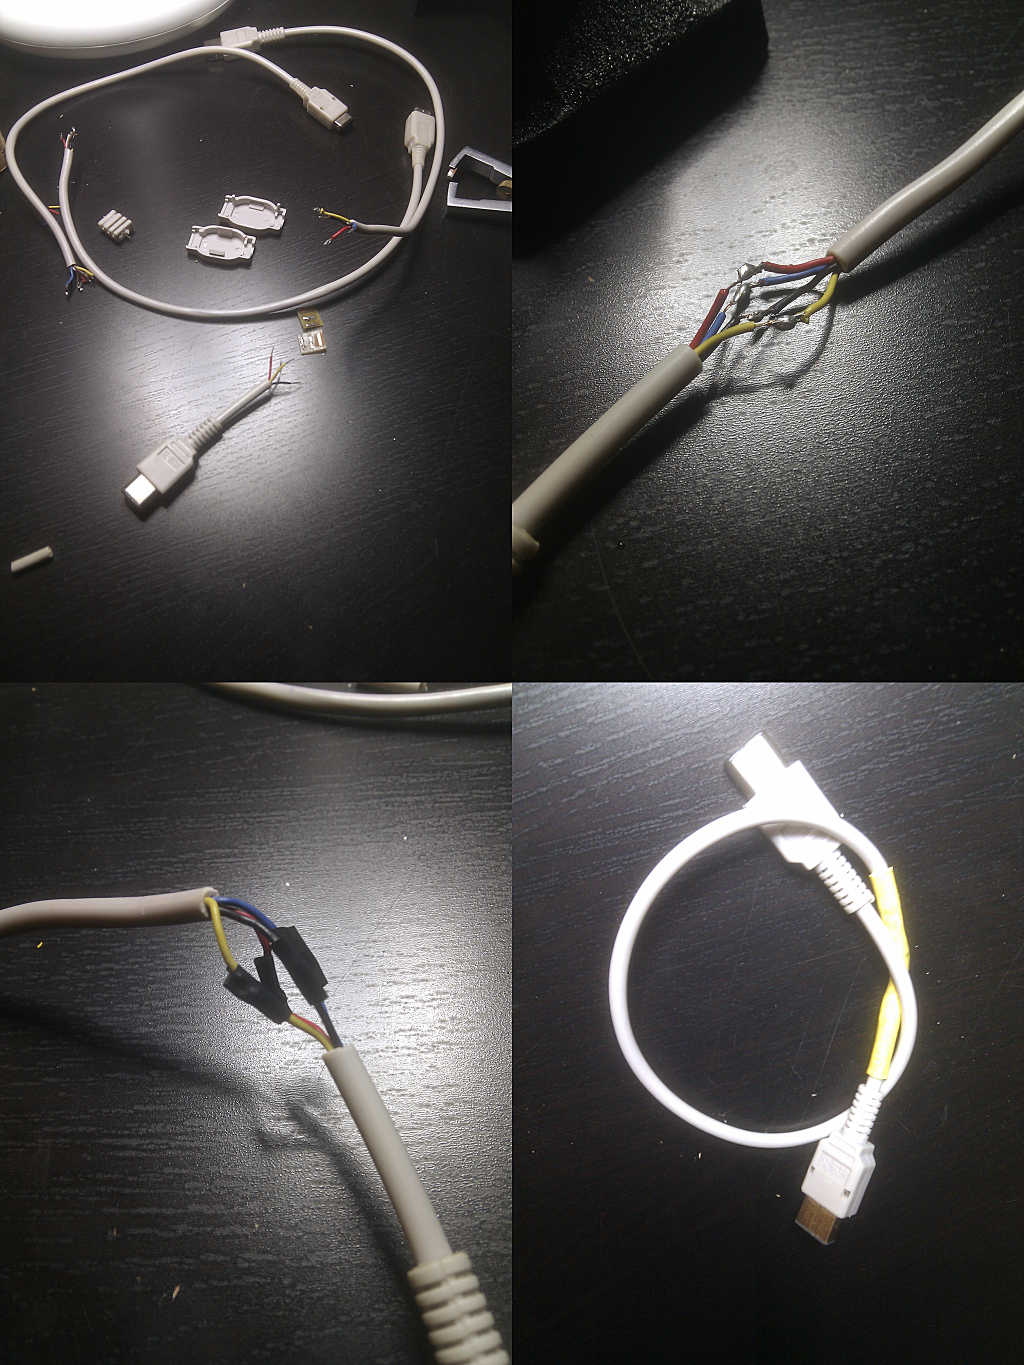 Game Boy Link Cable fixed